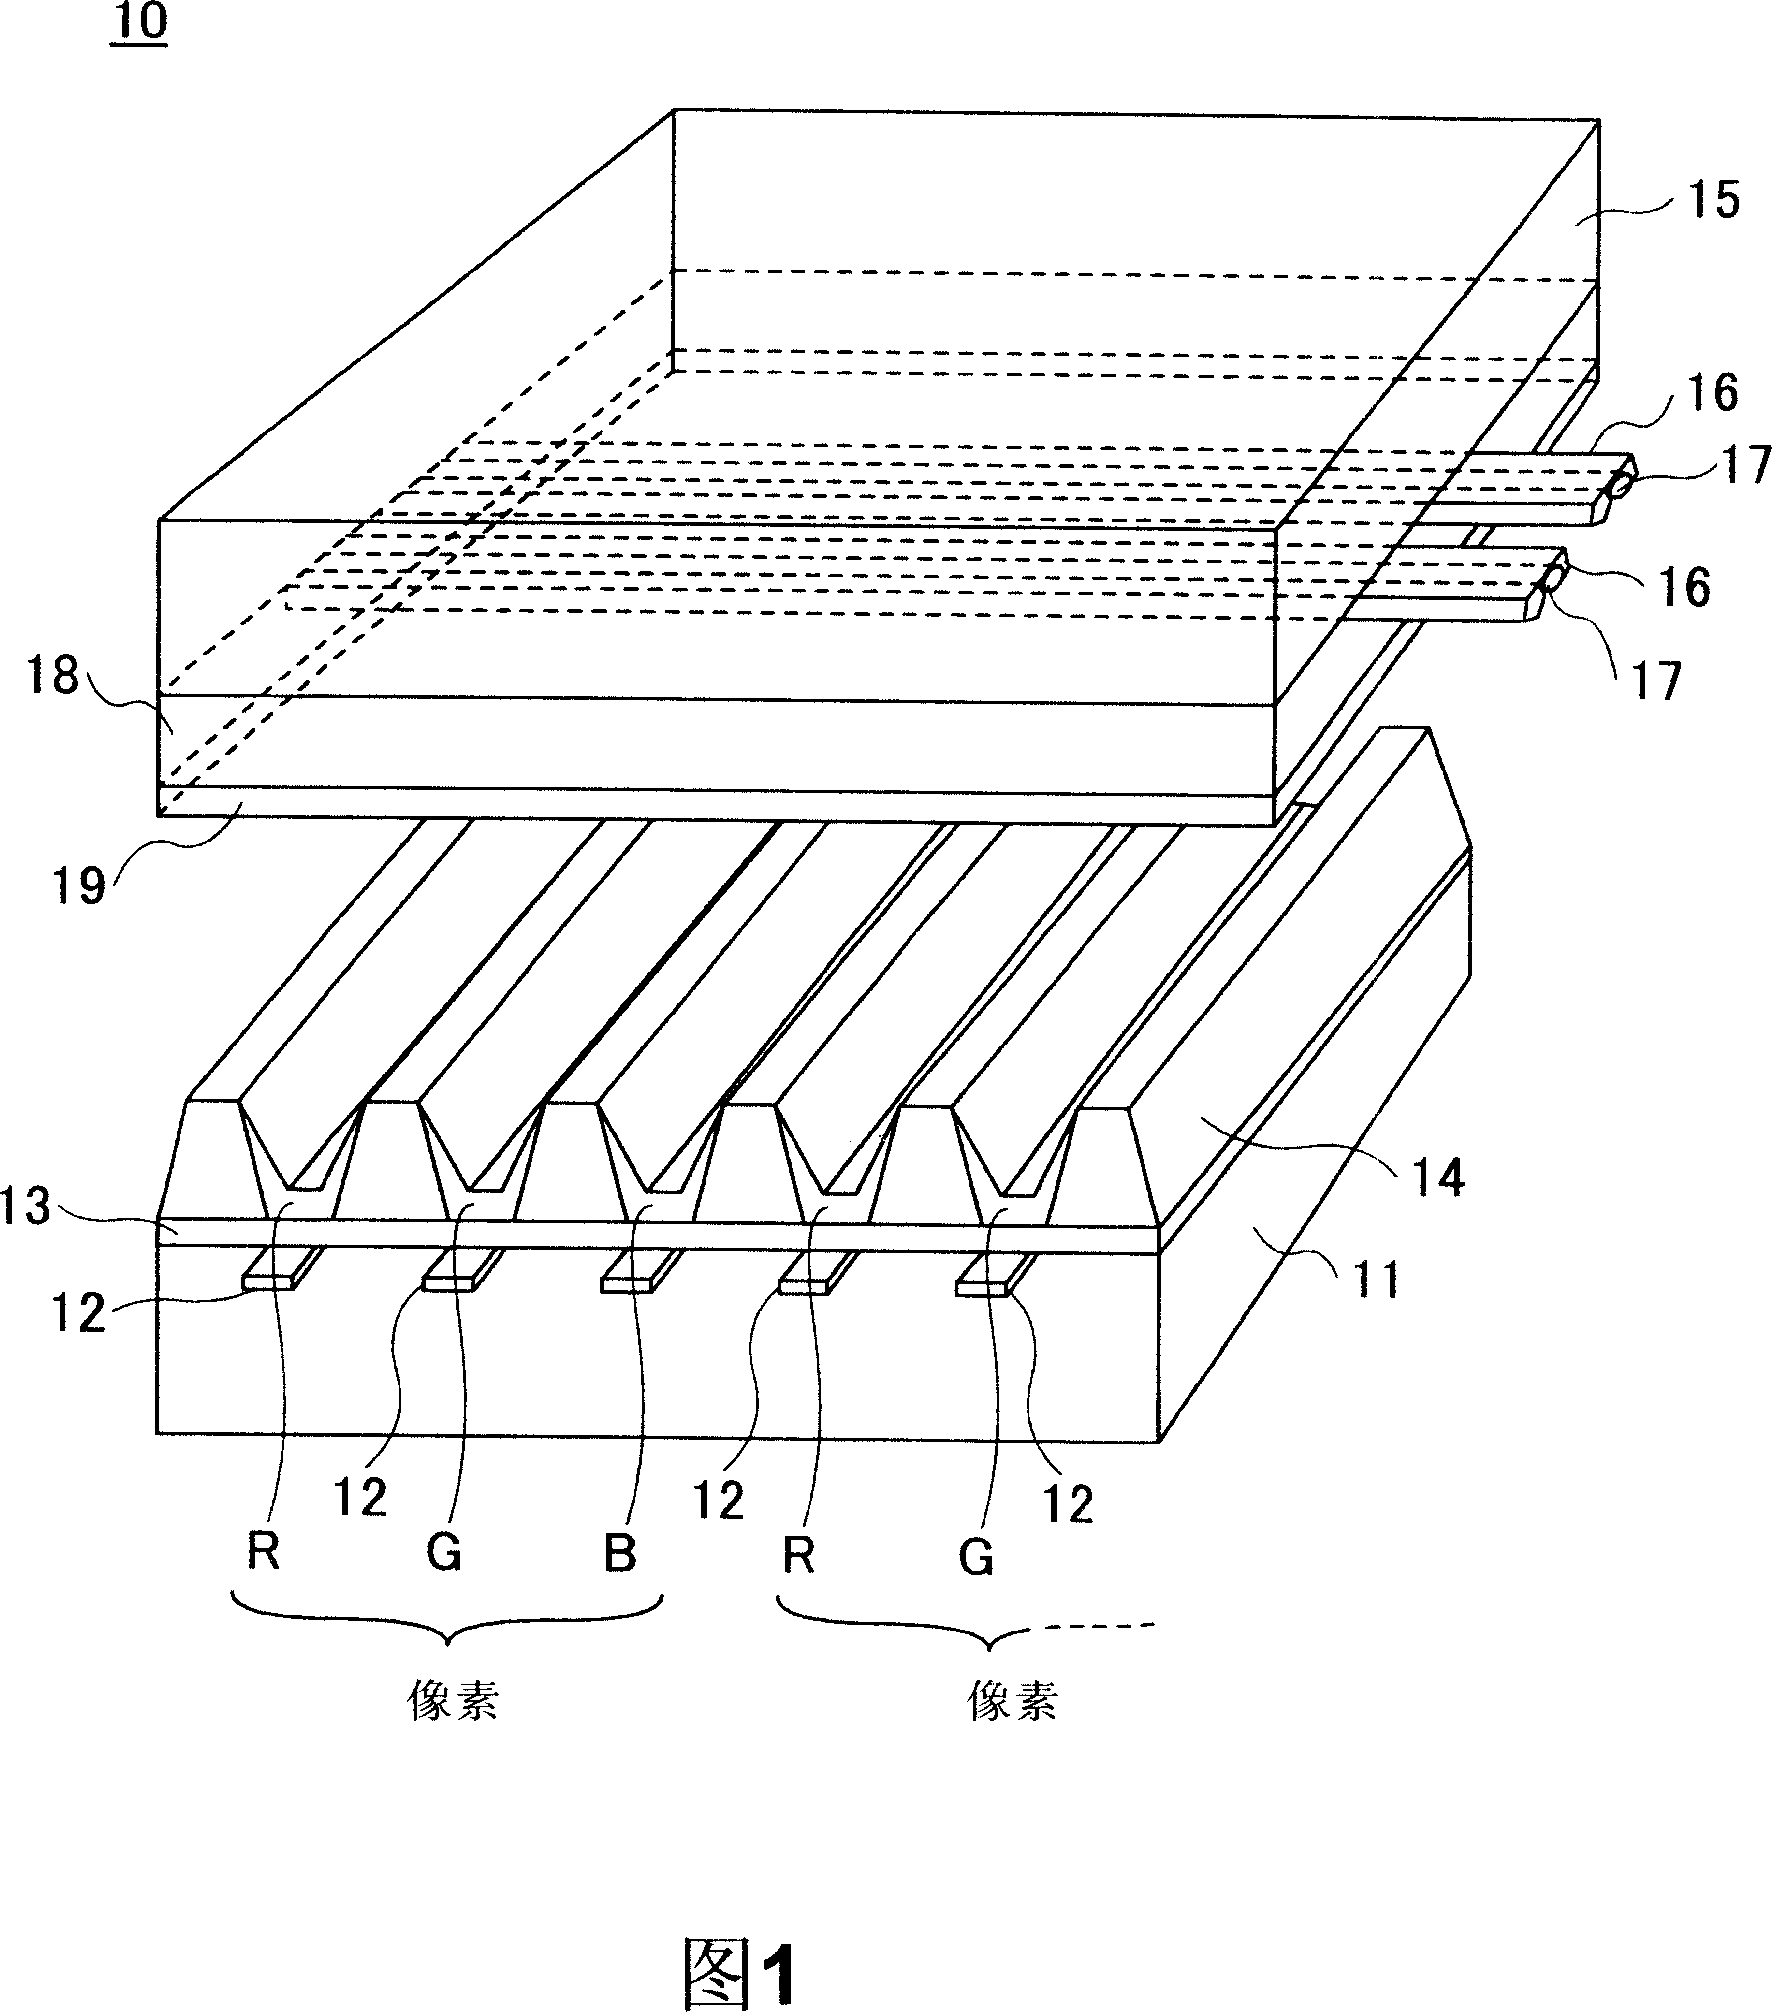 Plasma display panel with simultaneous address drive operation and sustain drive operation